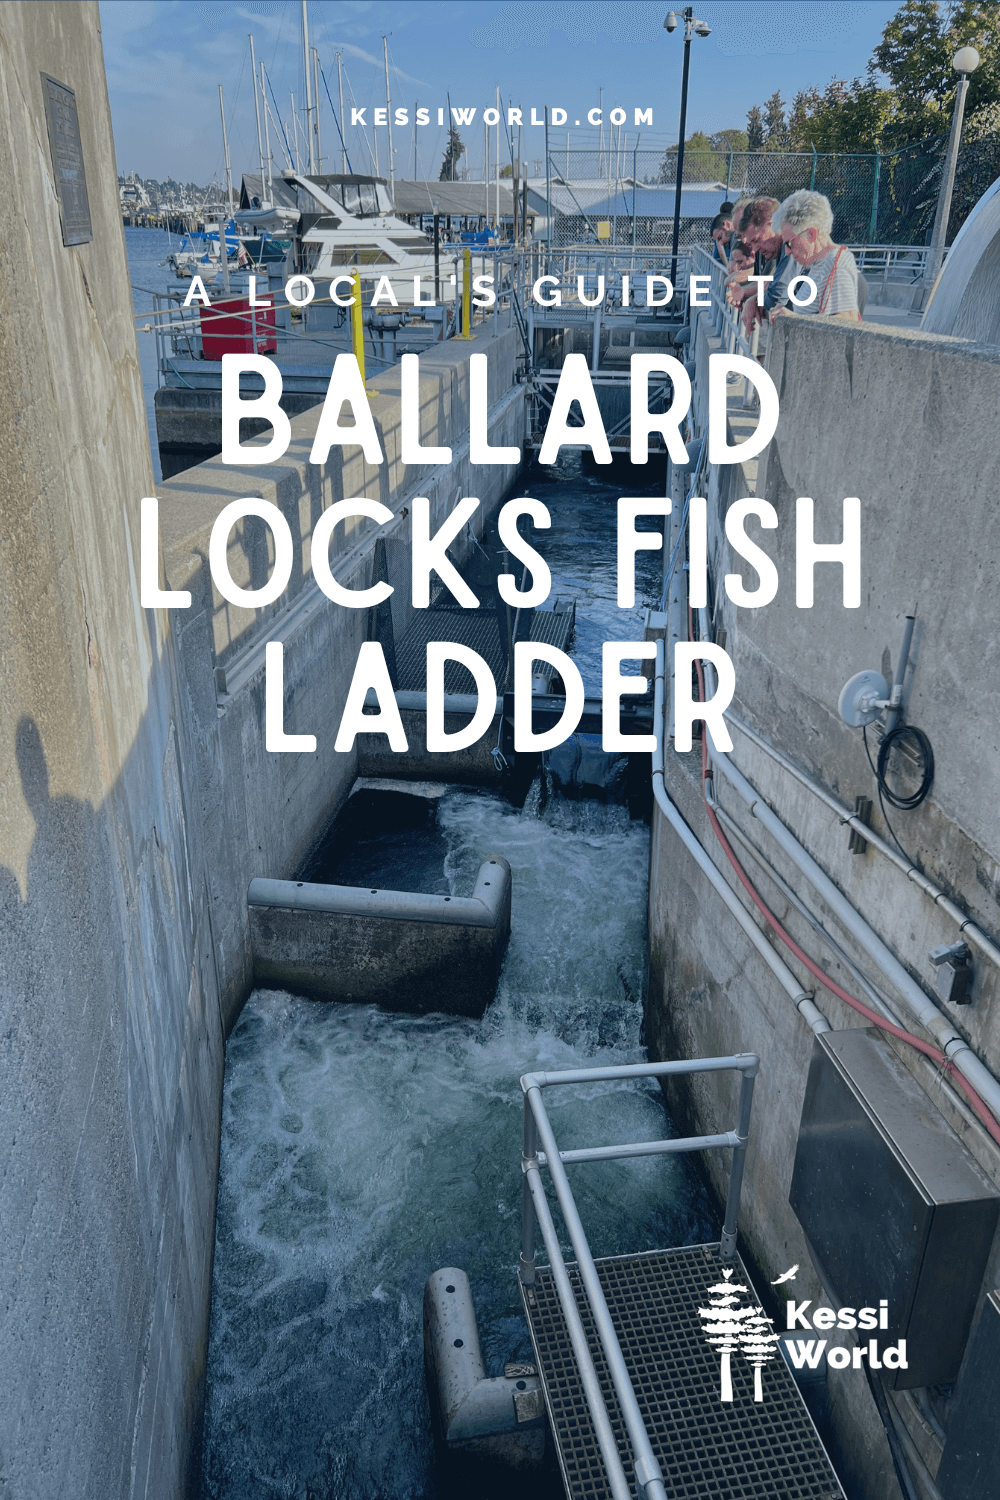 This Pinterest pin shows Ballard Locks Fish ladder written in white letters and shows rushing water in a concrete fish ladder.